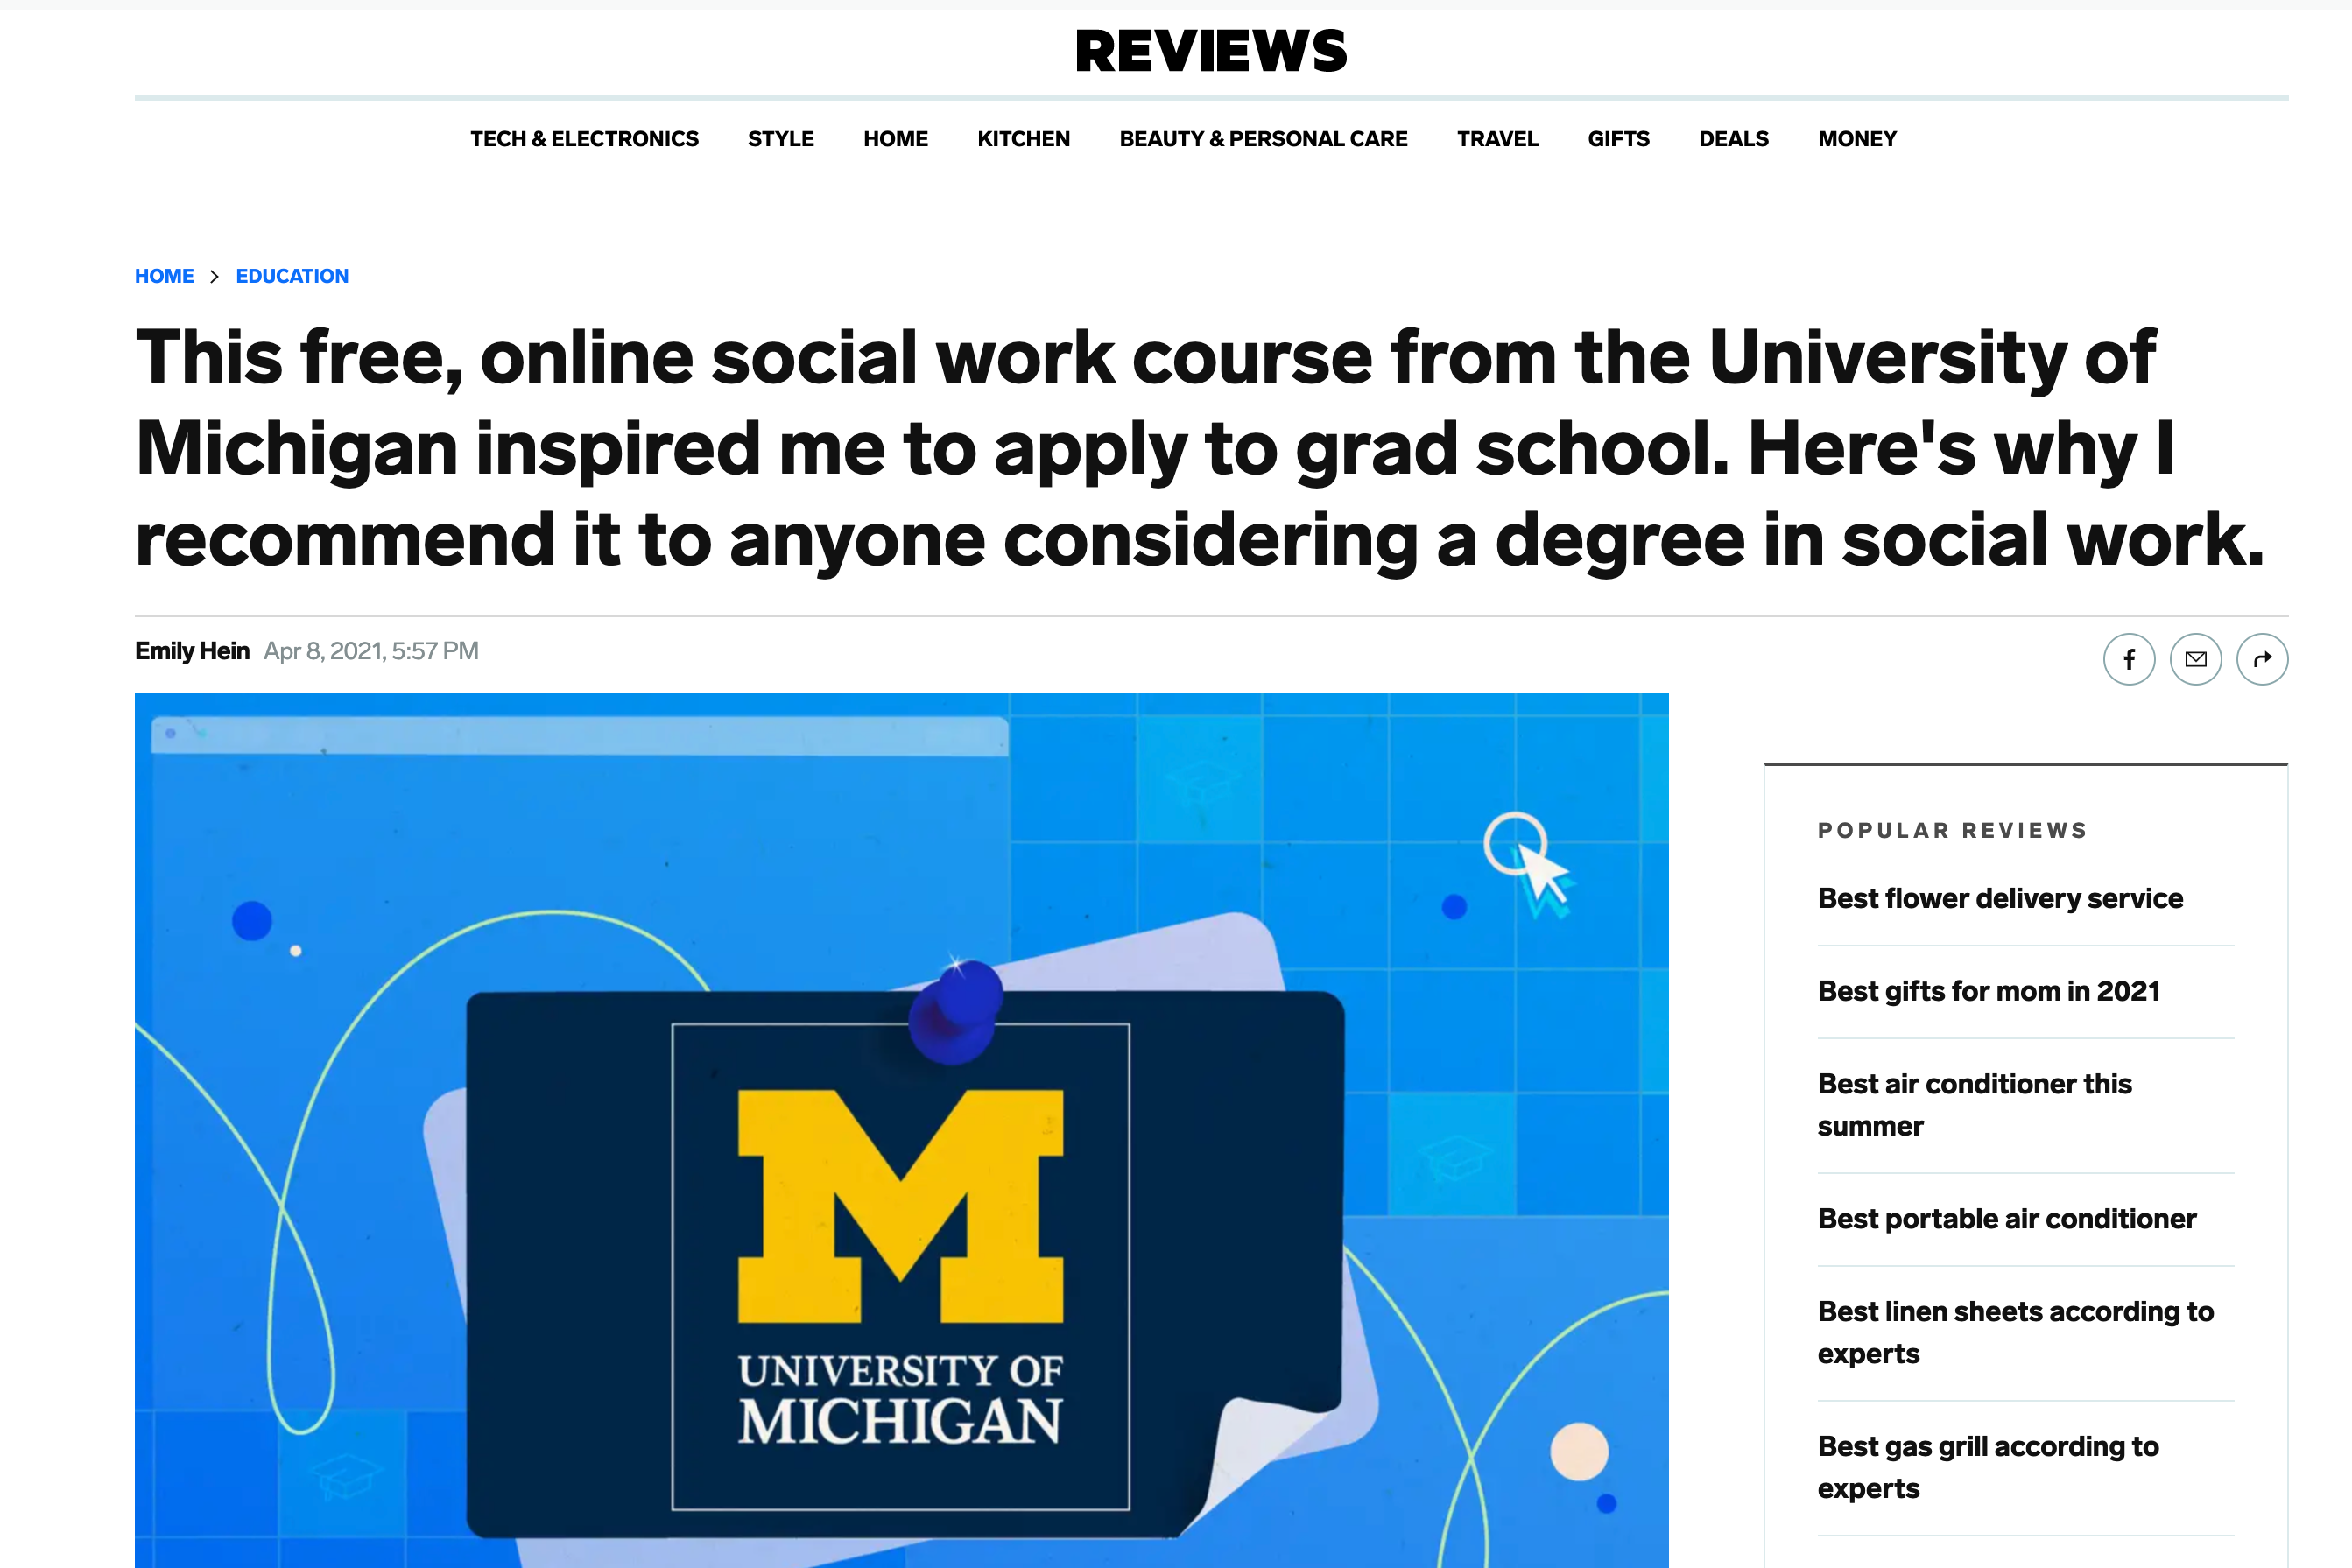 This free, online social work course from the University of Michigan inspired me to apply to grad school. Here’s why I recommend it to anyone considering a degree in social work.